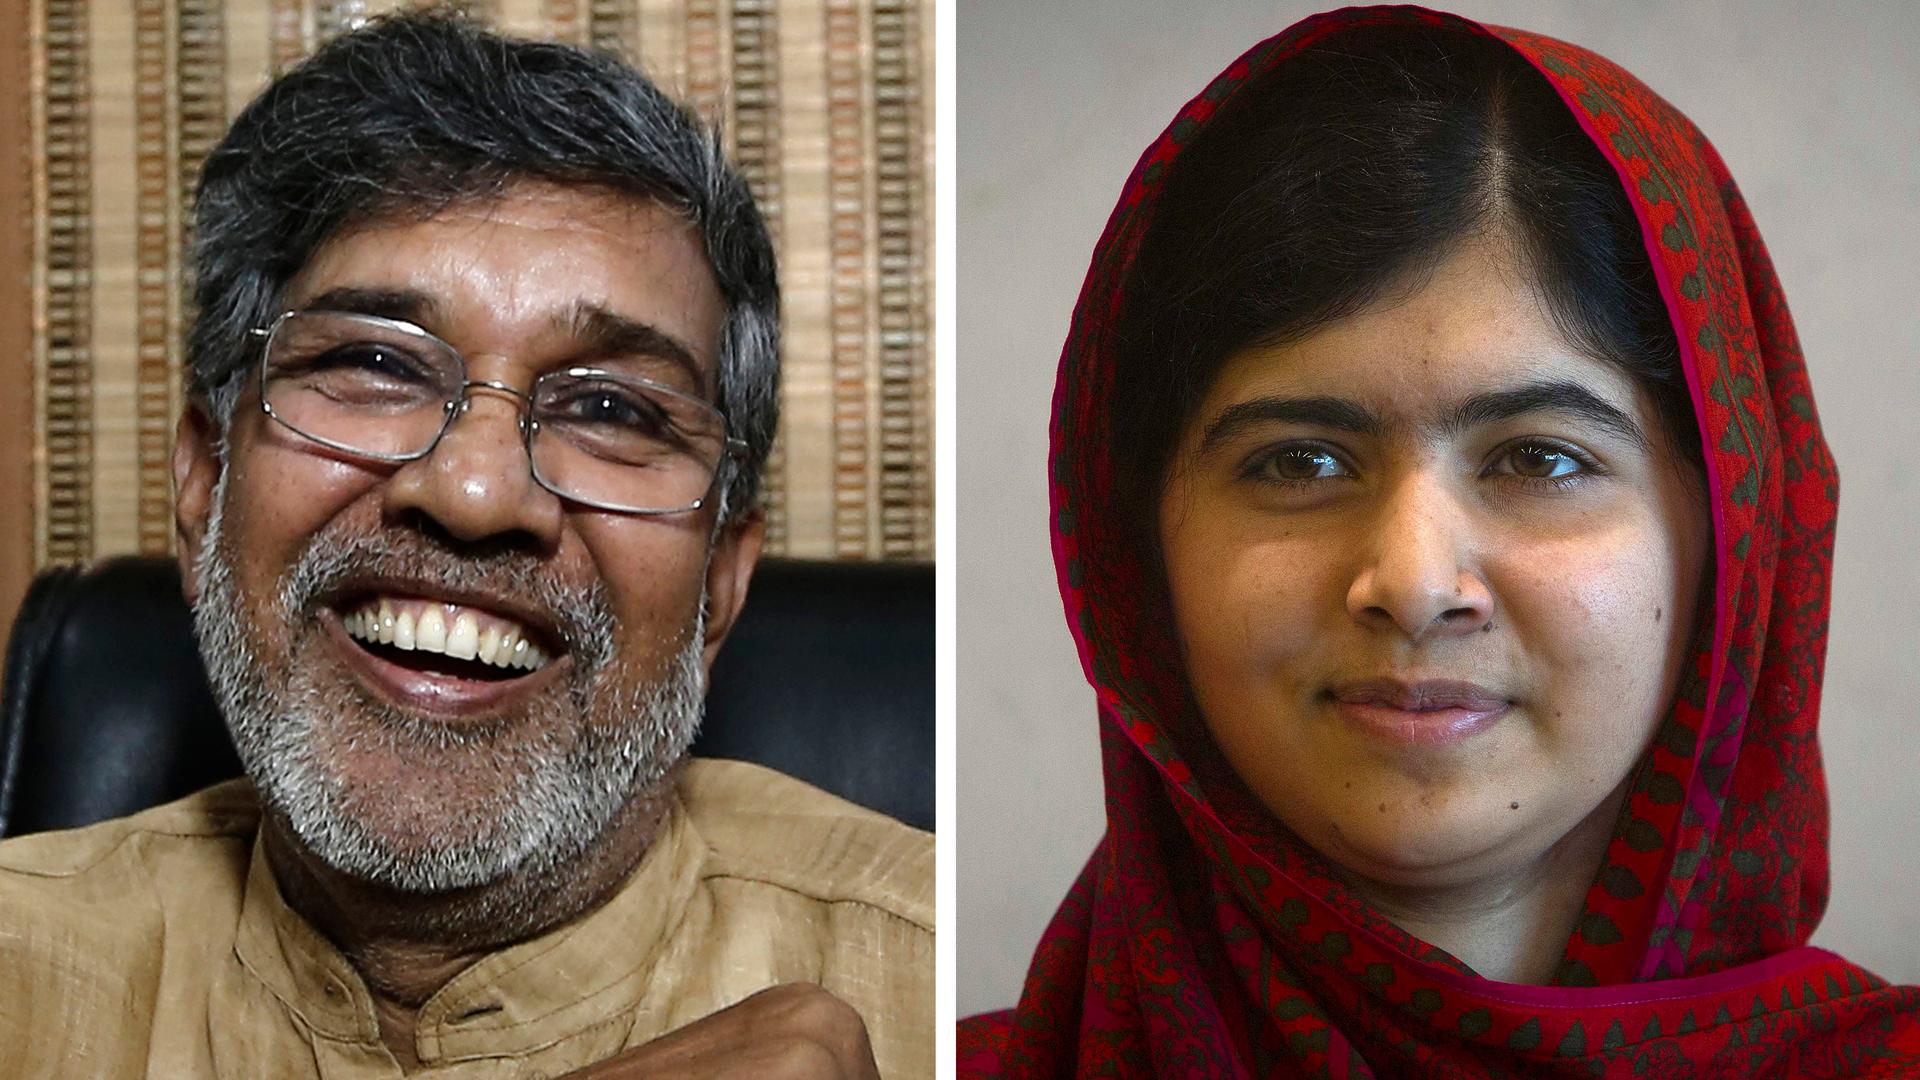 Malala Yousafzai, who was shot in the head by the Taliban in 2012 for advocating girls' rights to education, and Kailash Satyarthi won the 2014 Nobel Peace Prize on Friday.